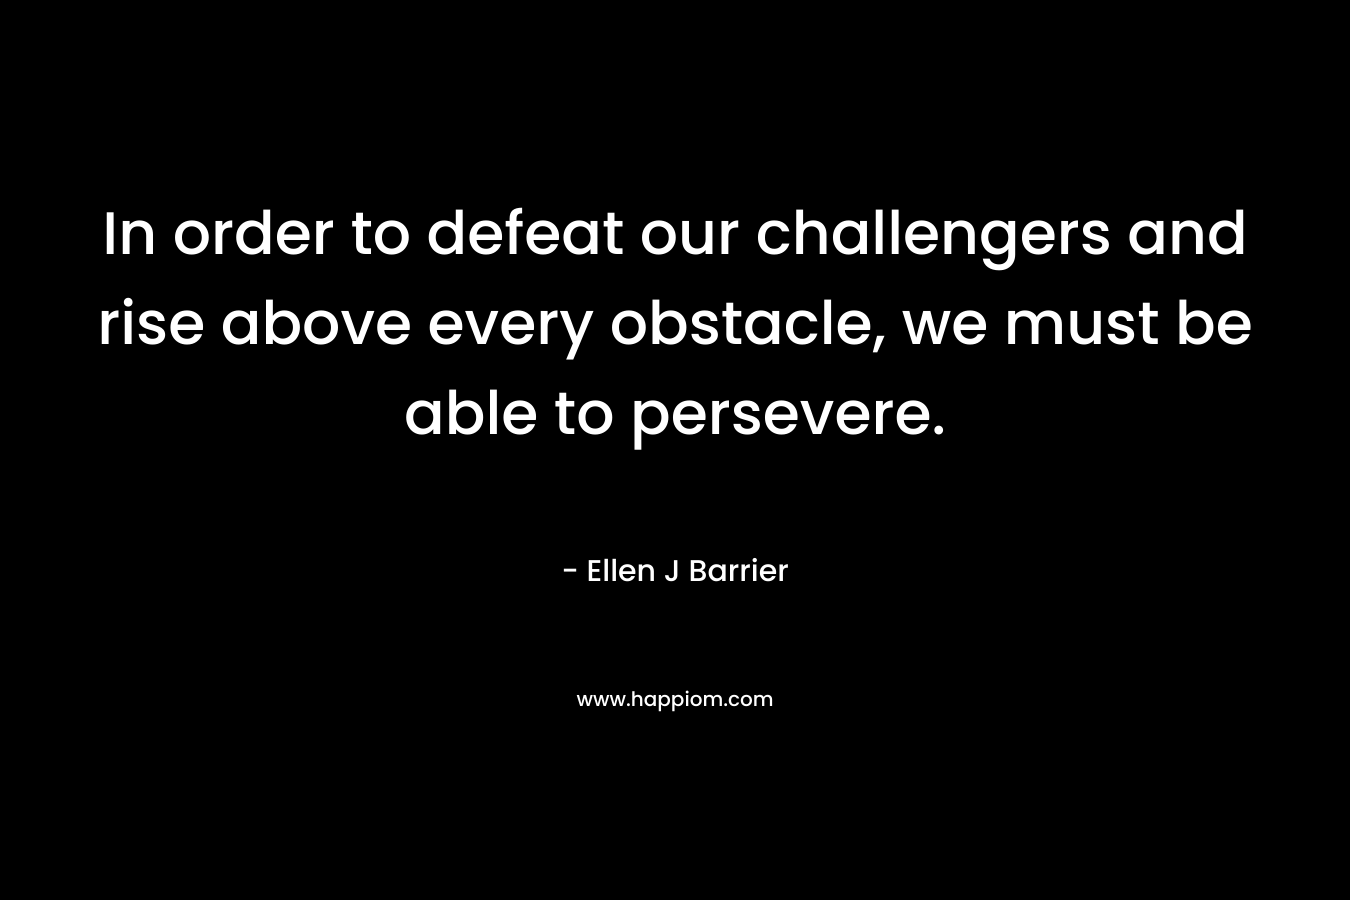 In order to defeat our challengers and rise above every obstacle, we must be able to persevere. – Ellen J Barrier